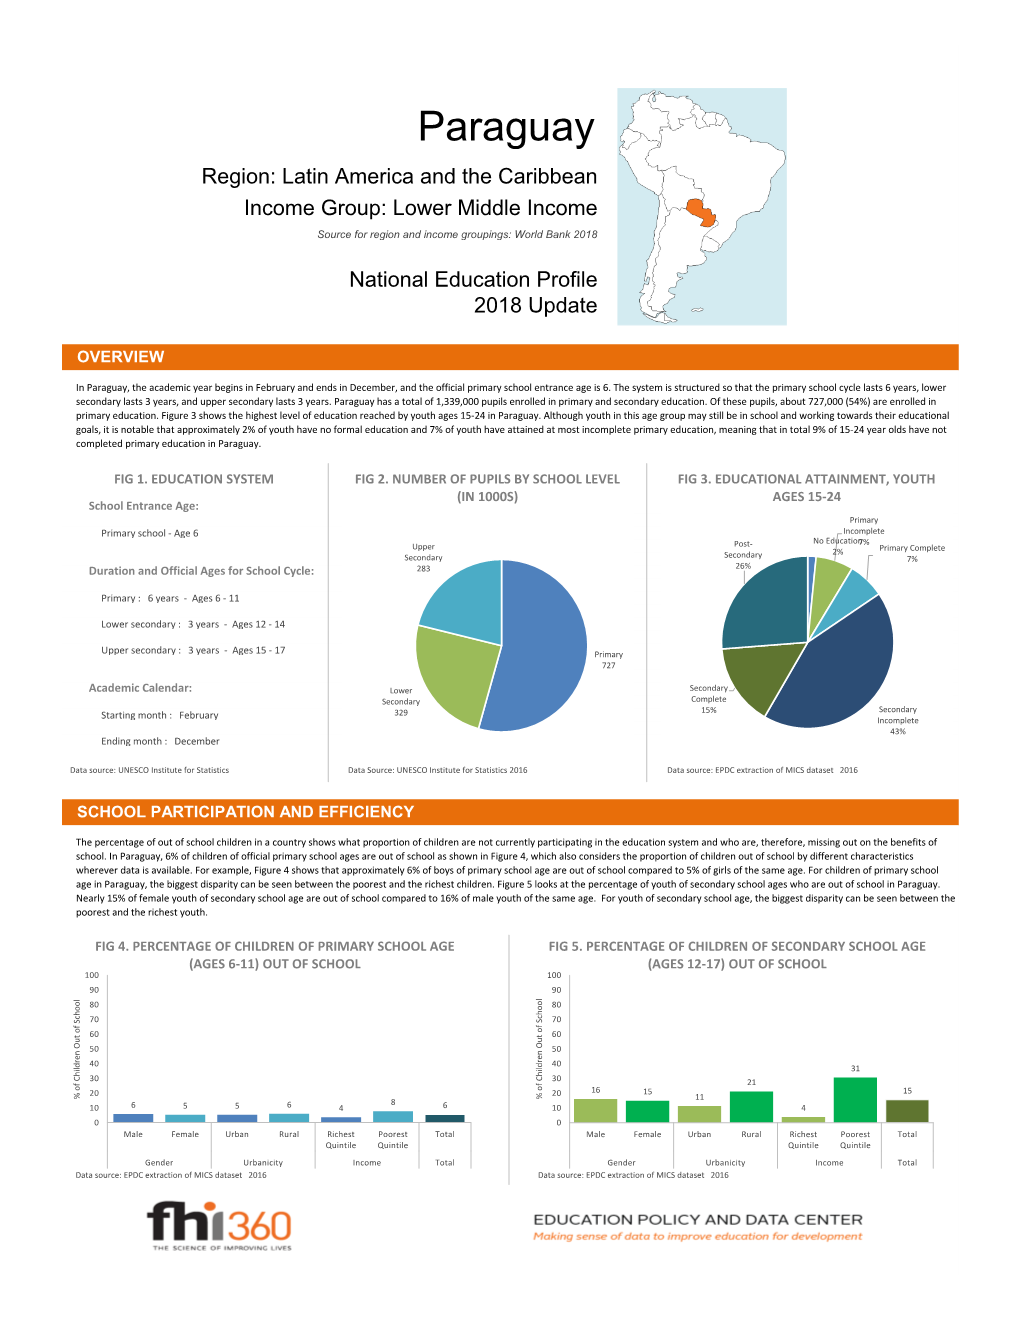 Paraguay Region: Latin America and the Caribbean Income Group: Lower Middle Income Source for Region and Income Groupings: World Bank 2018